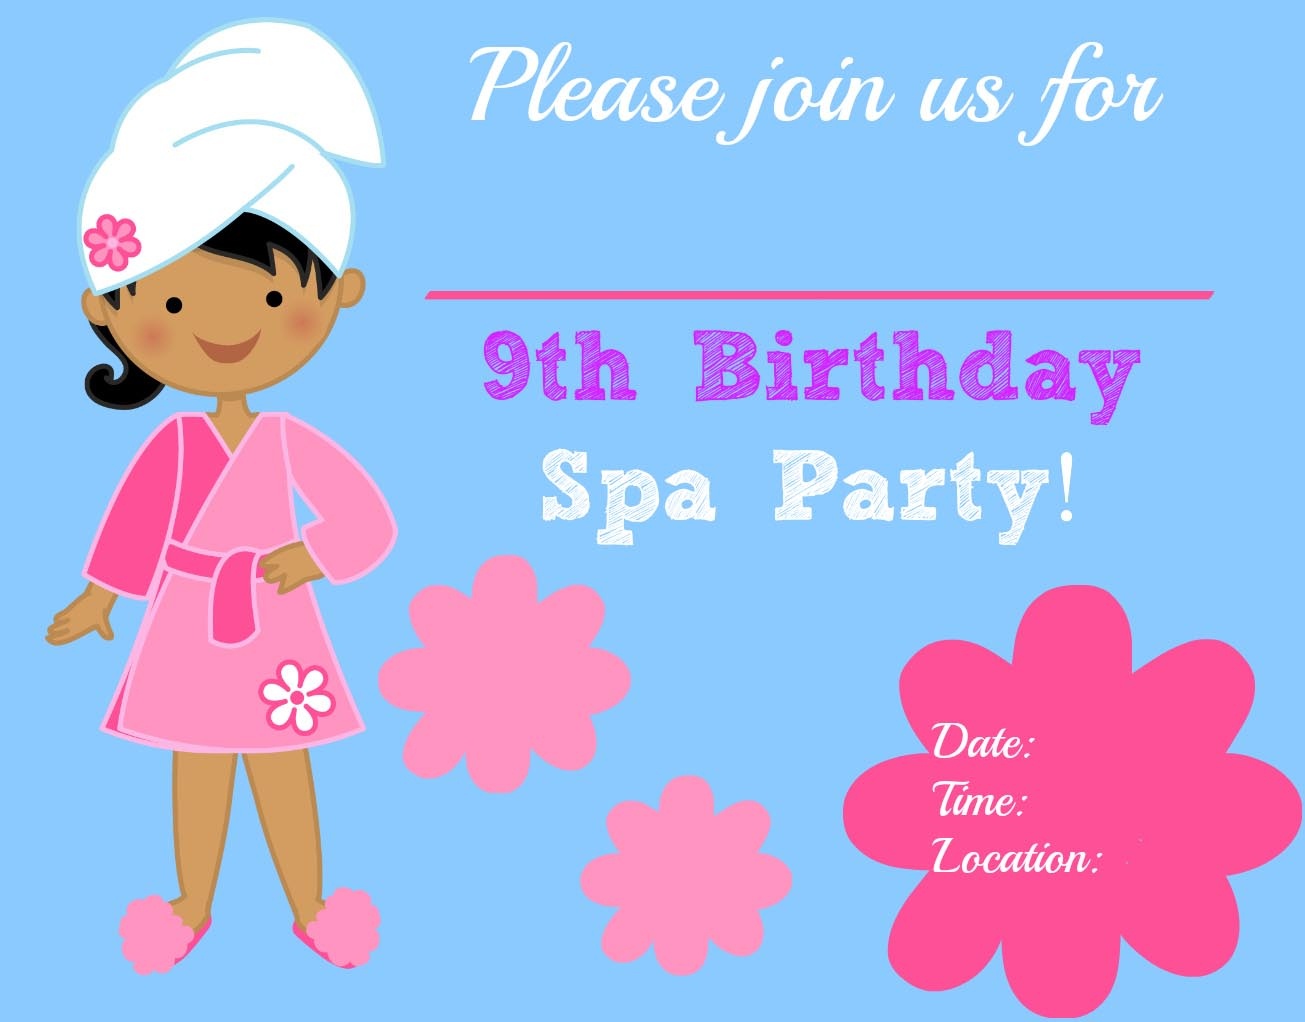 Free Printable Spa Party Invitations | Home Party Ideas - Free Printable Spa Party Invitations Templates